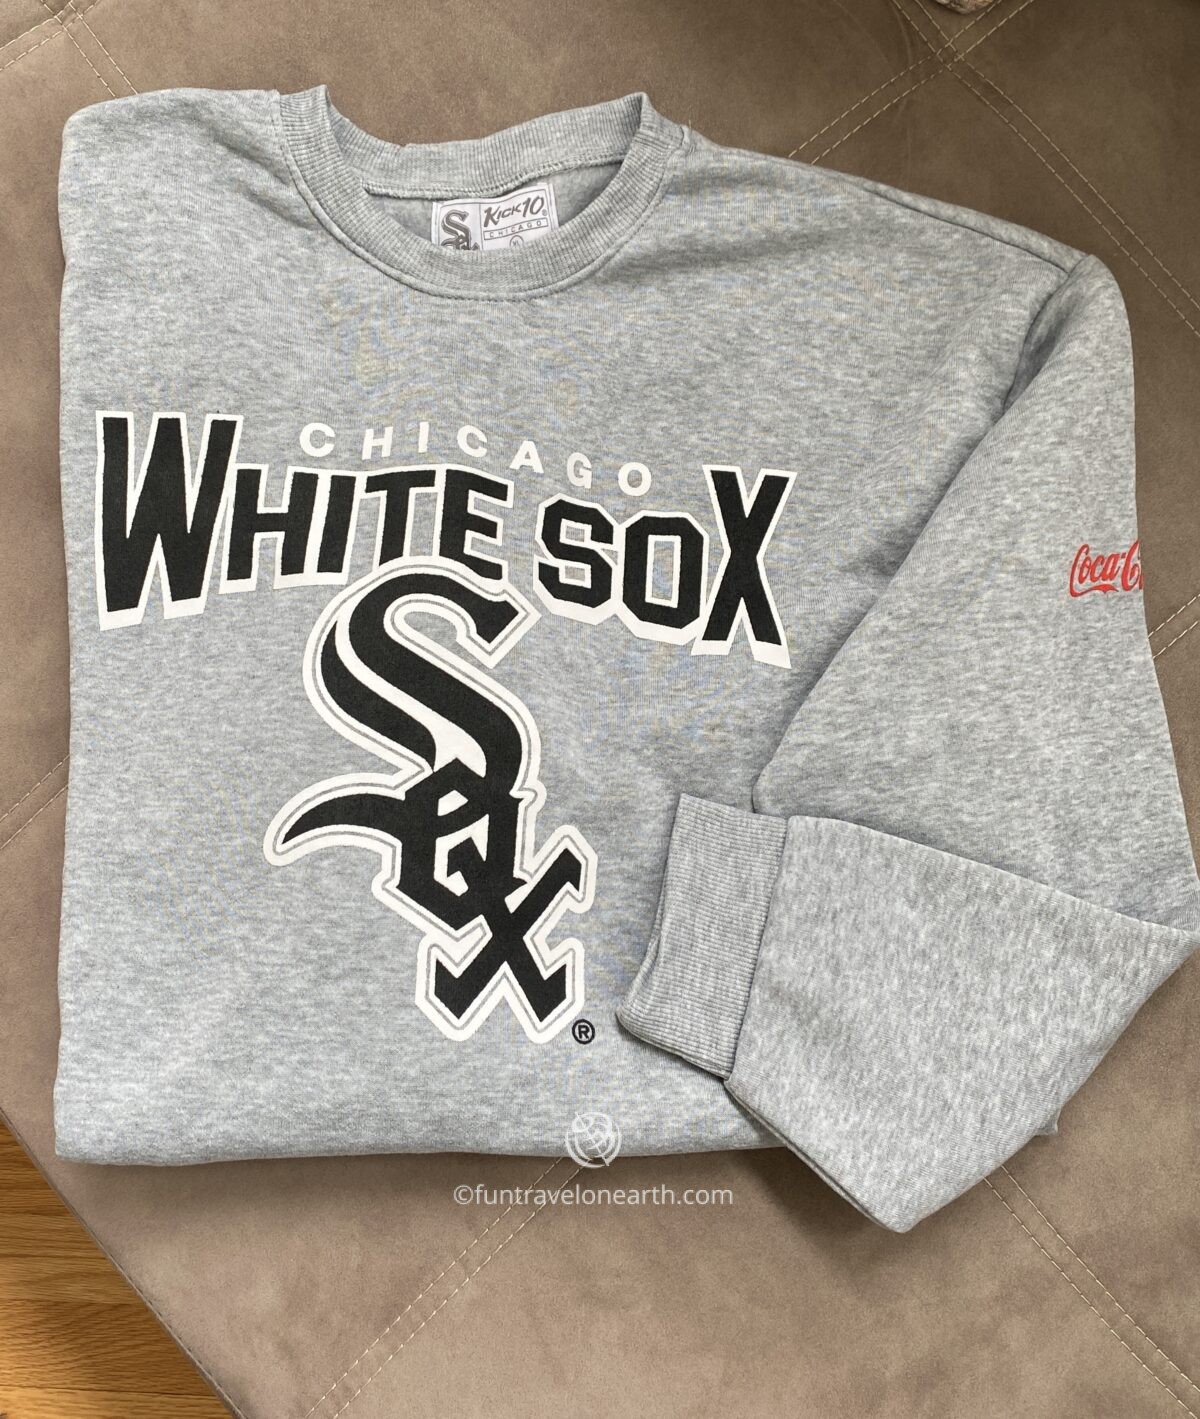 White Sox, Visitor's benefit